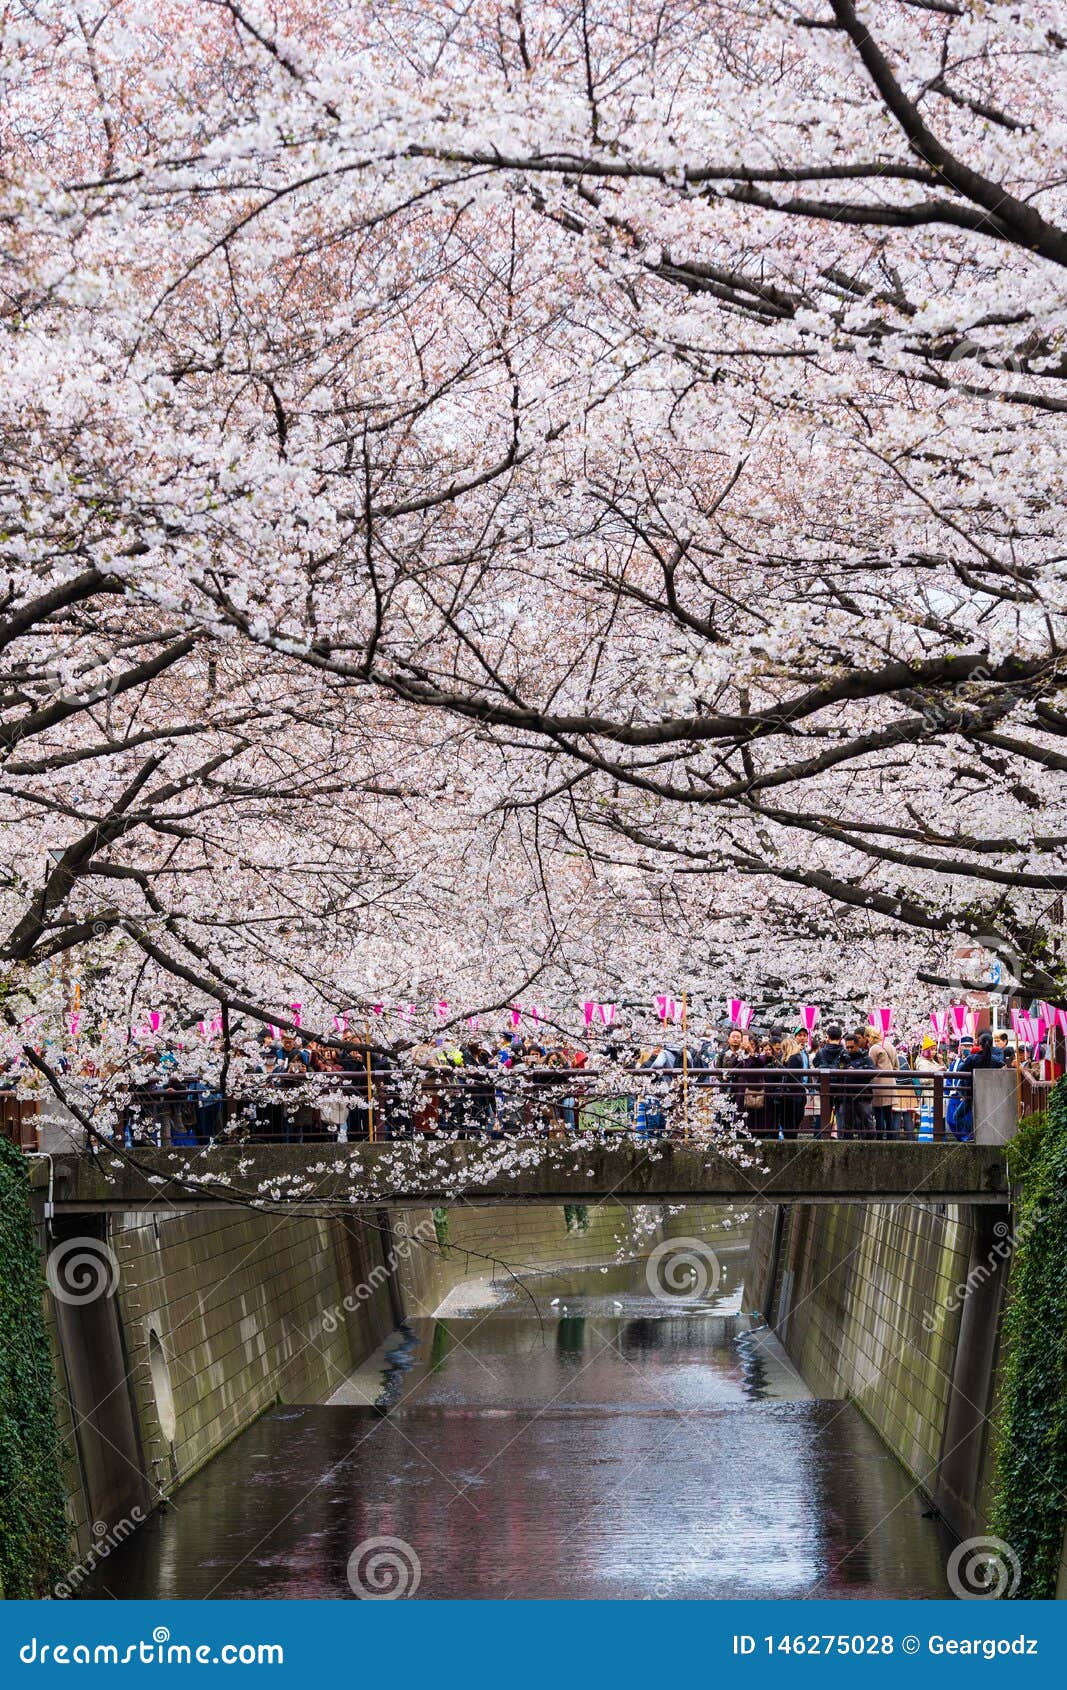 Cherry Blossom Festival in Full Bloom at Meguro River . Meguro River is